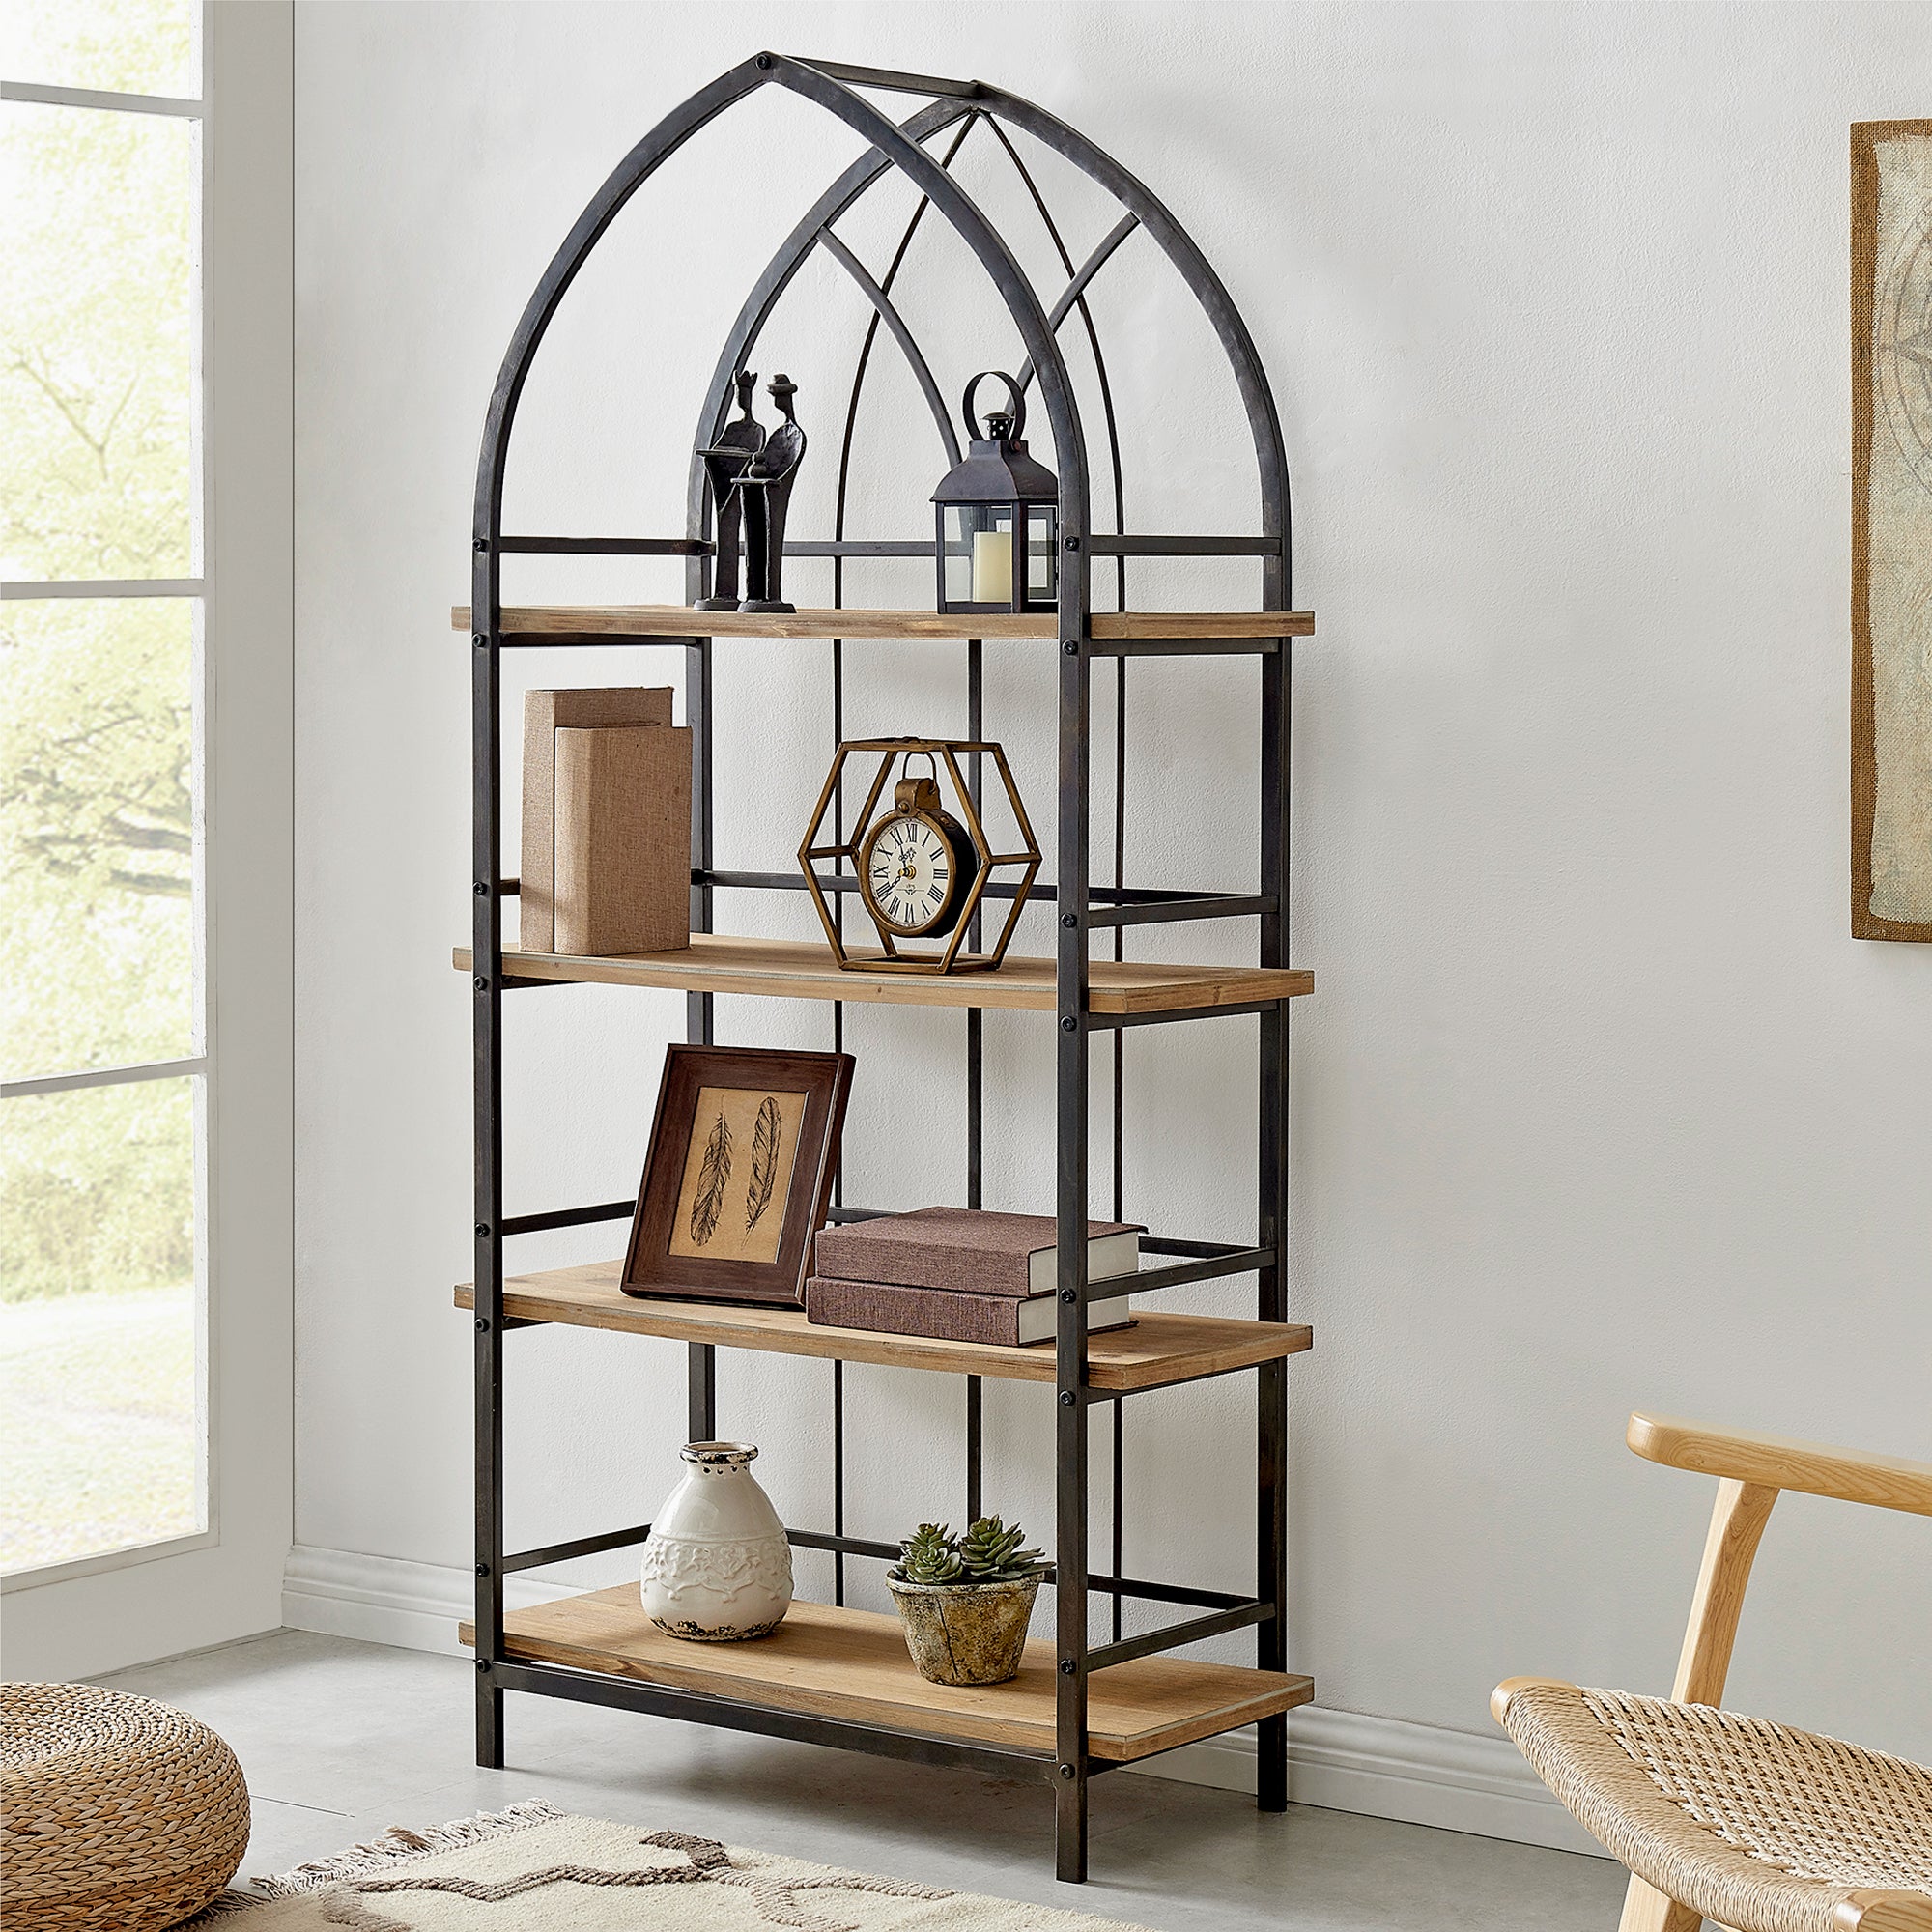 Arch shaped bookcase